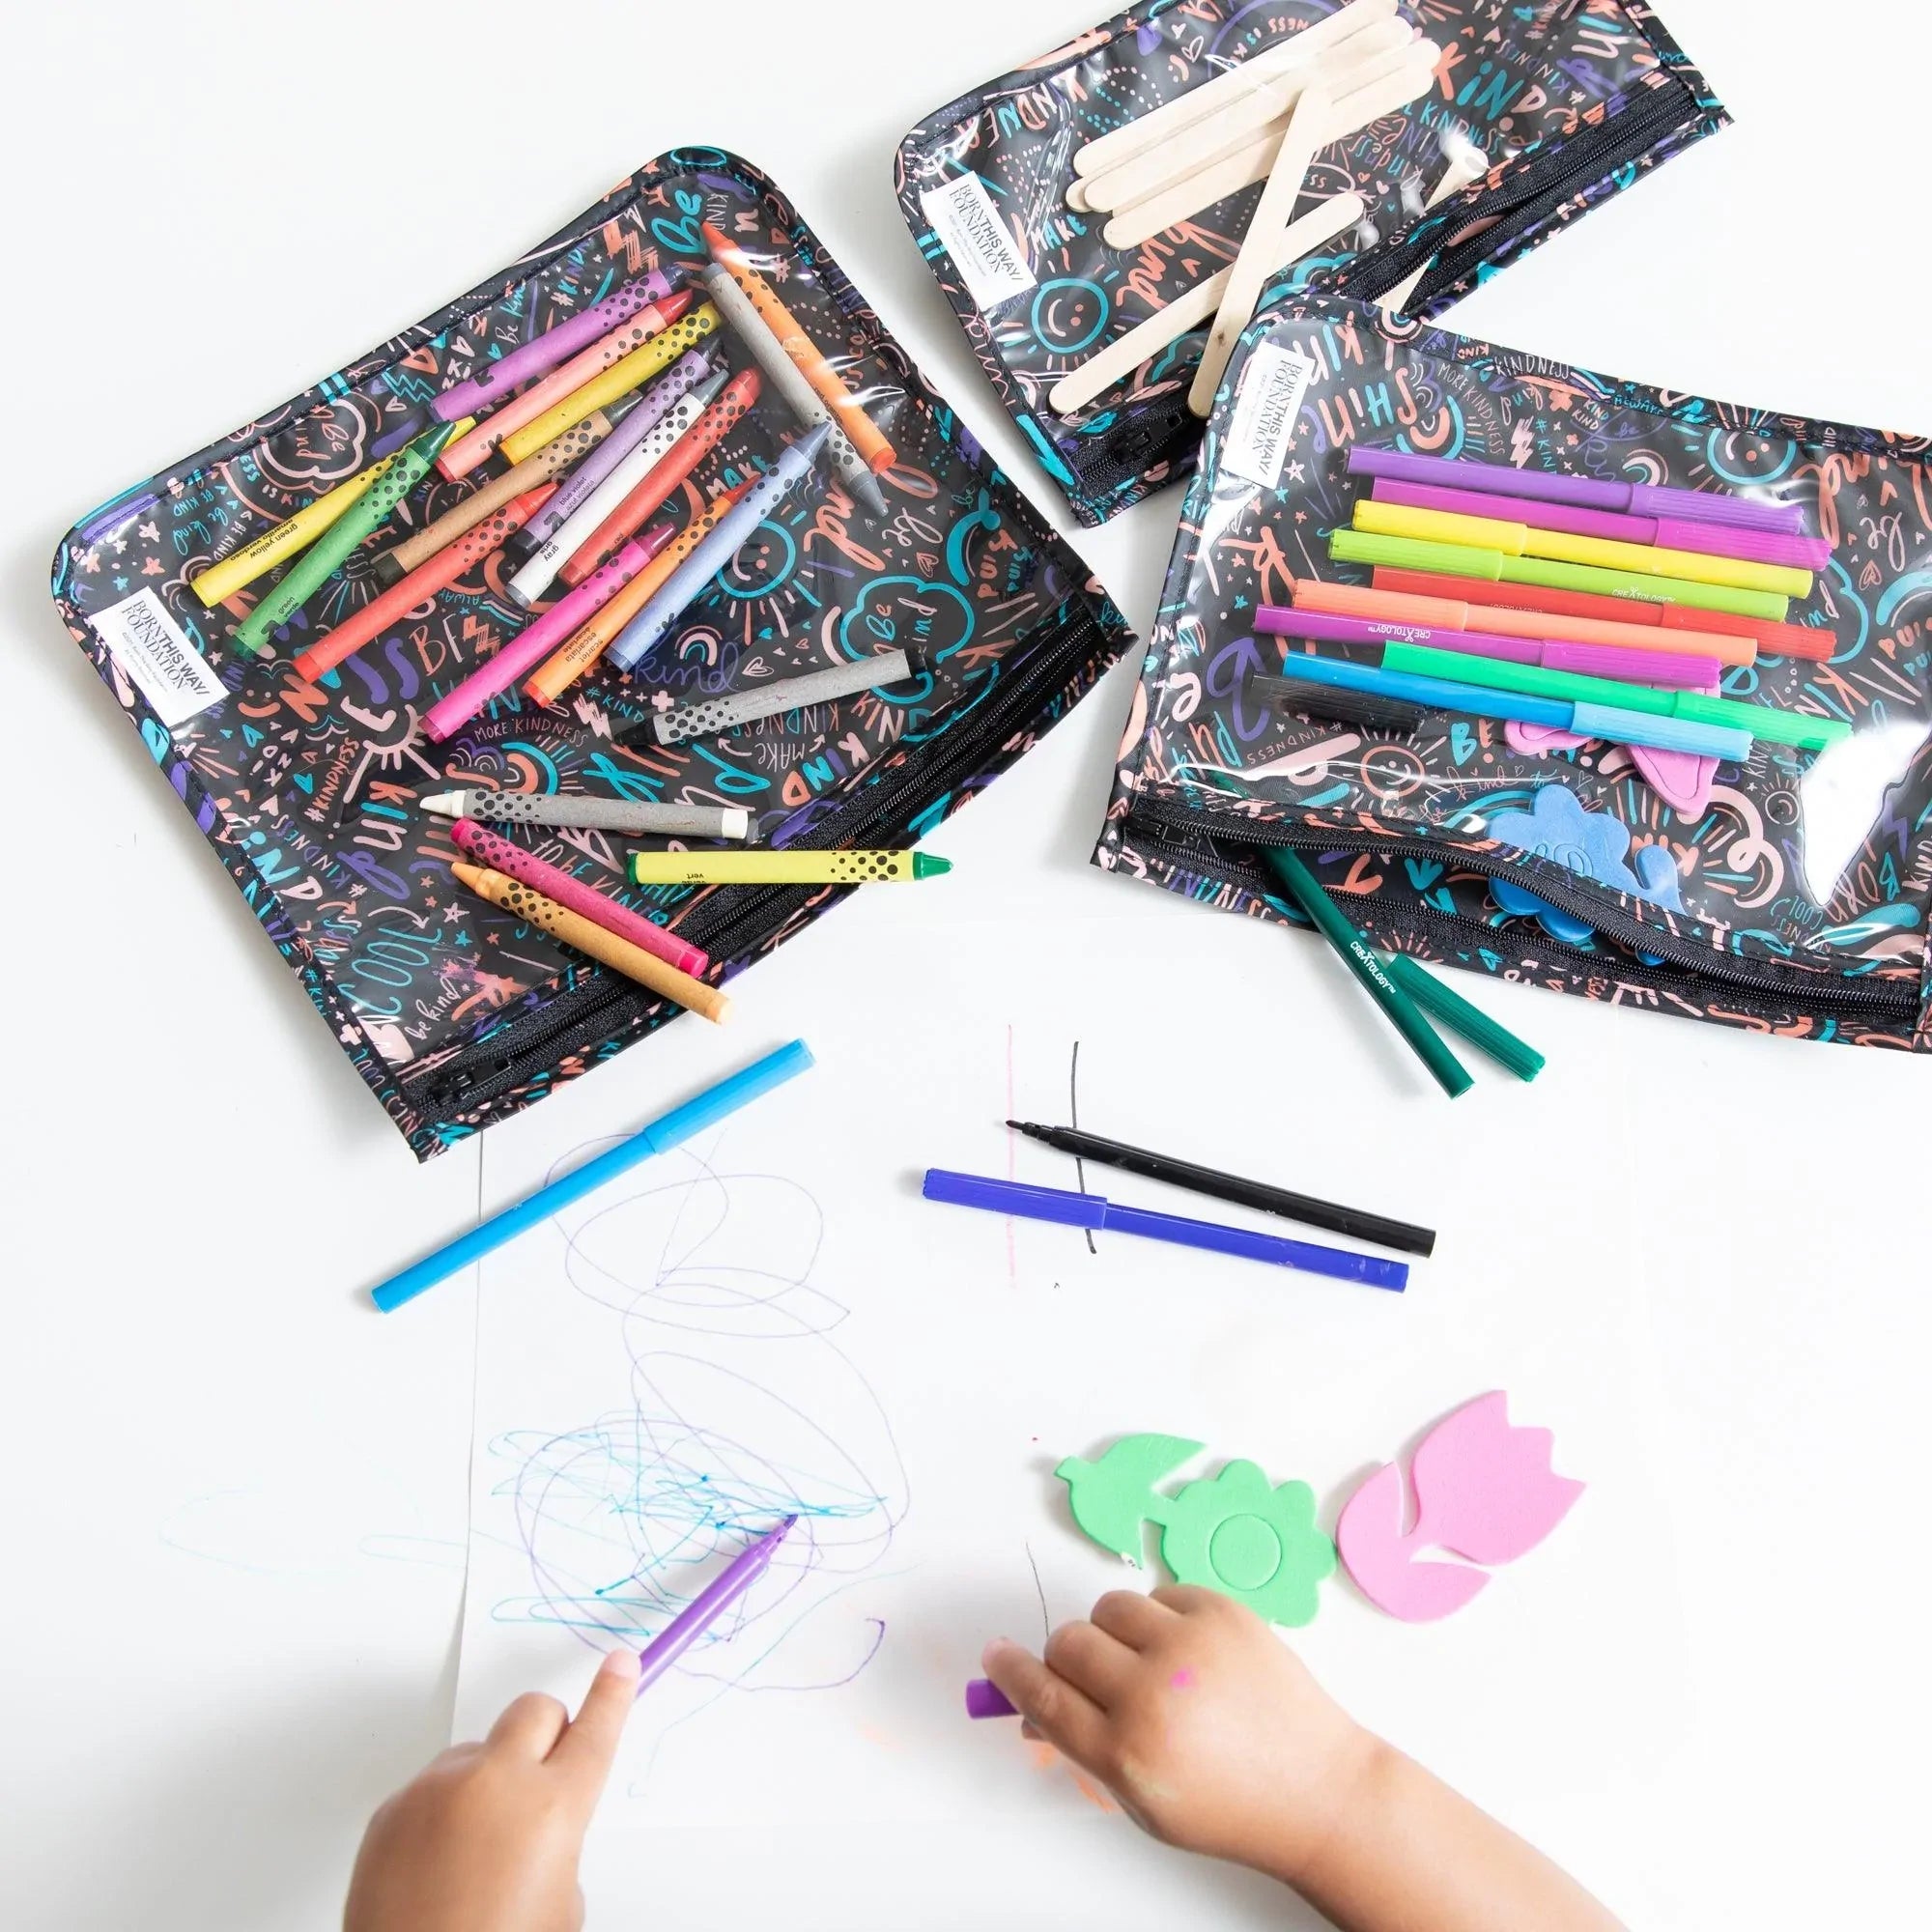 Born This Way Foundation Little Artists Gift Bundle, Be Kind - Bumkins